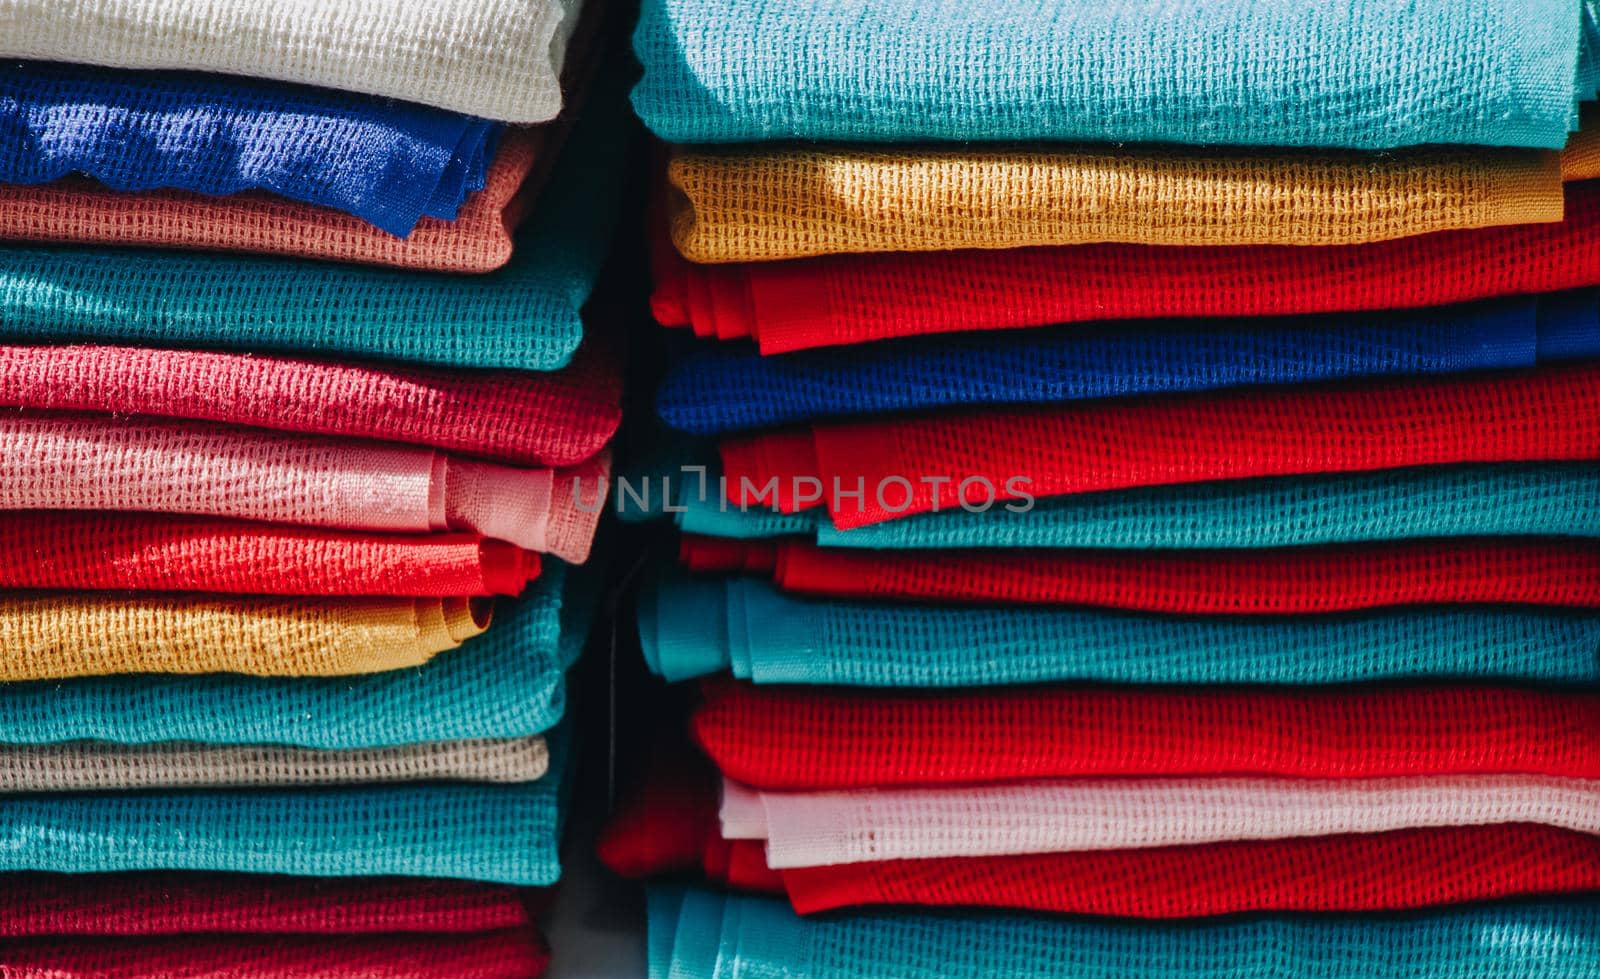 Pile of bright Multi-colored pieces of fabric in a bazaar